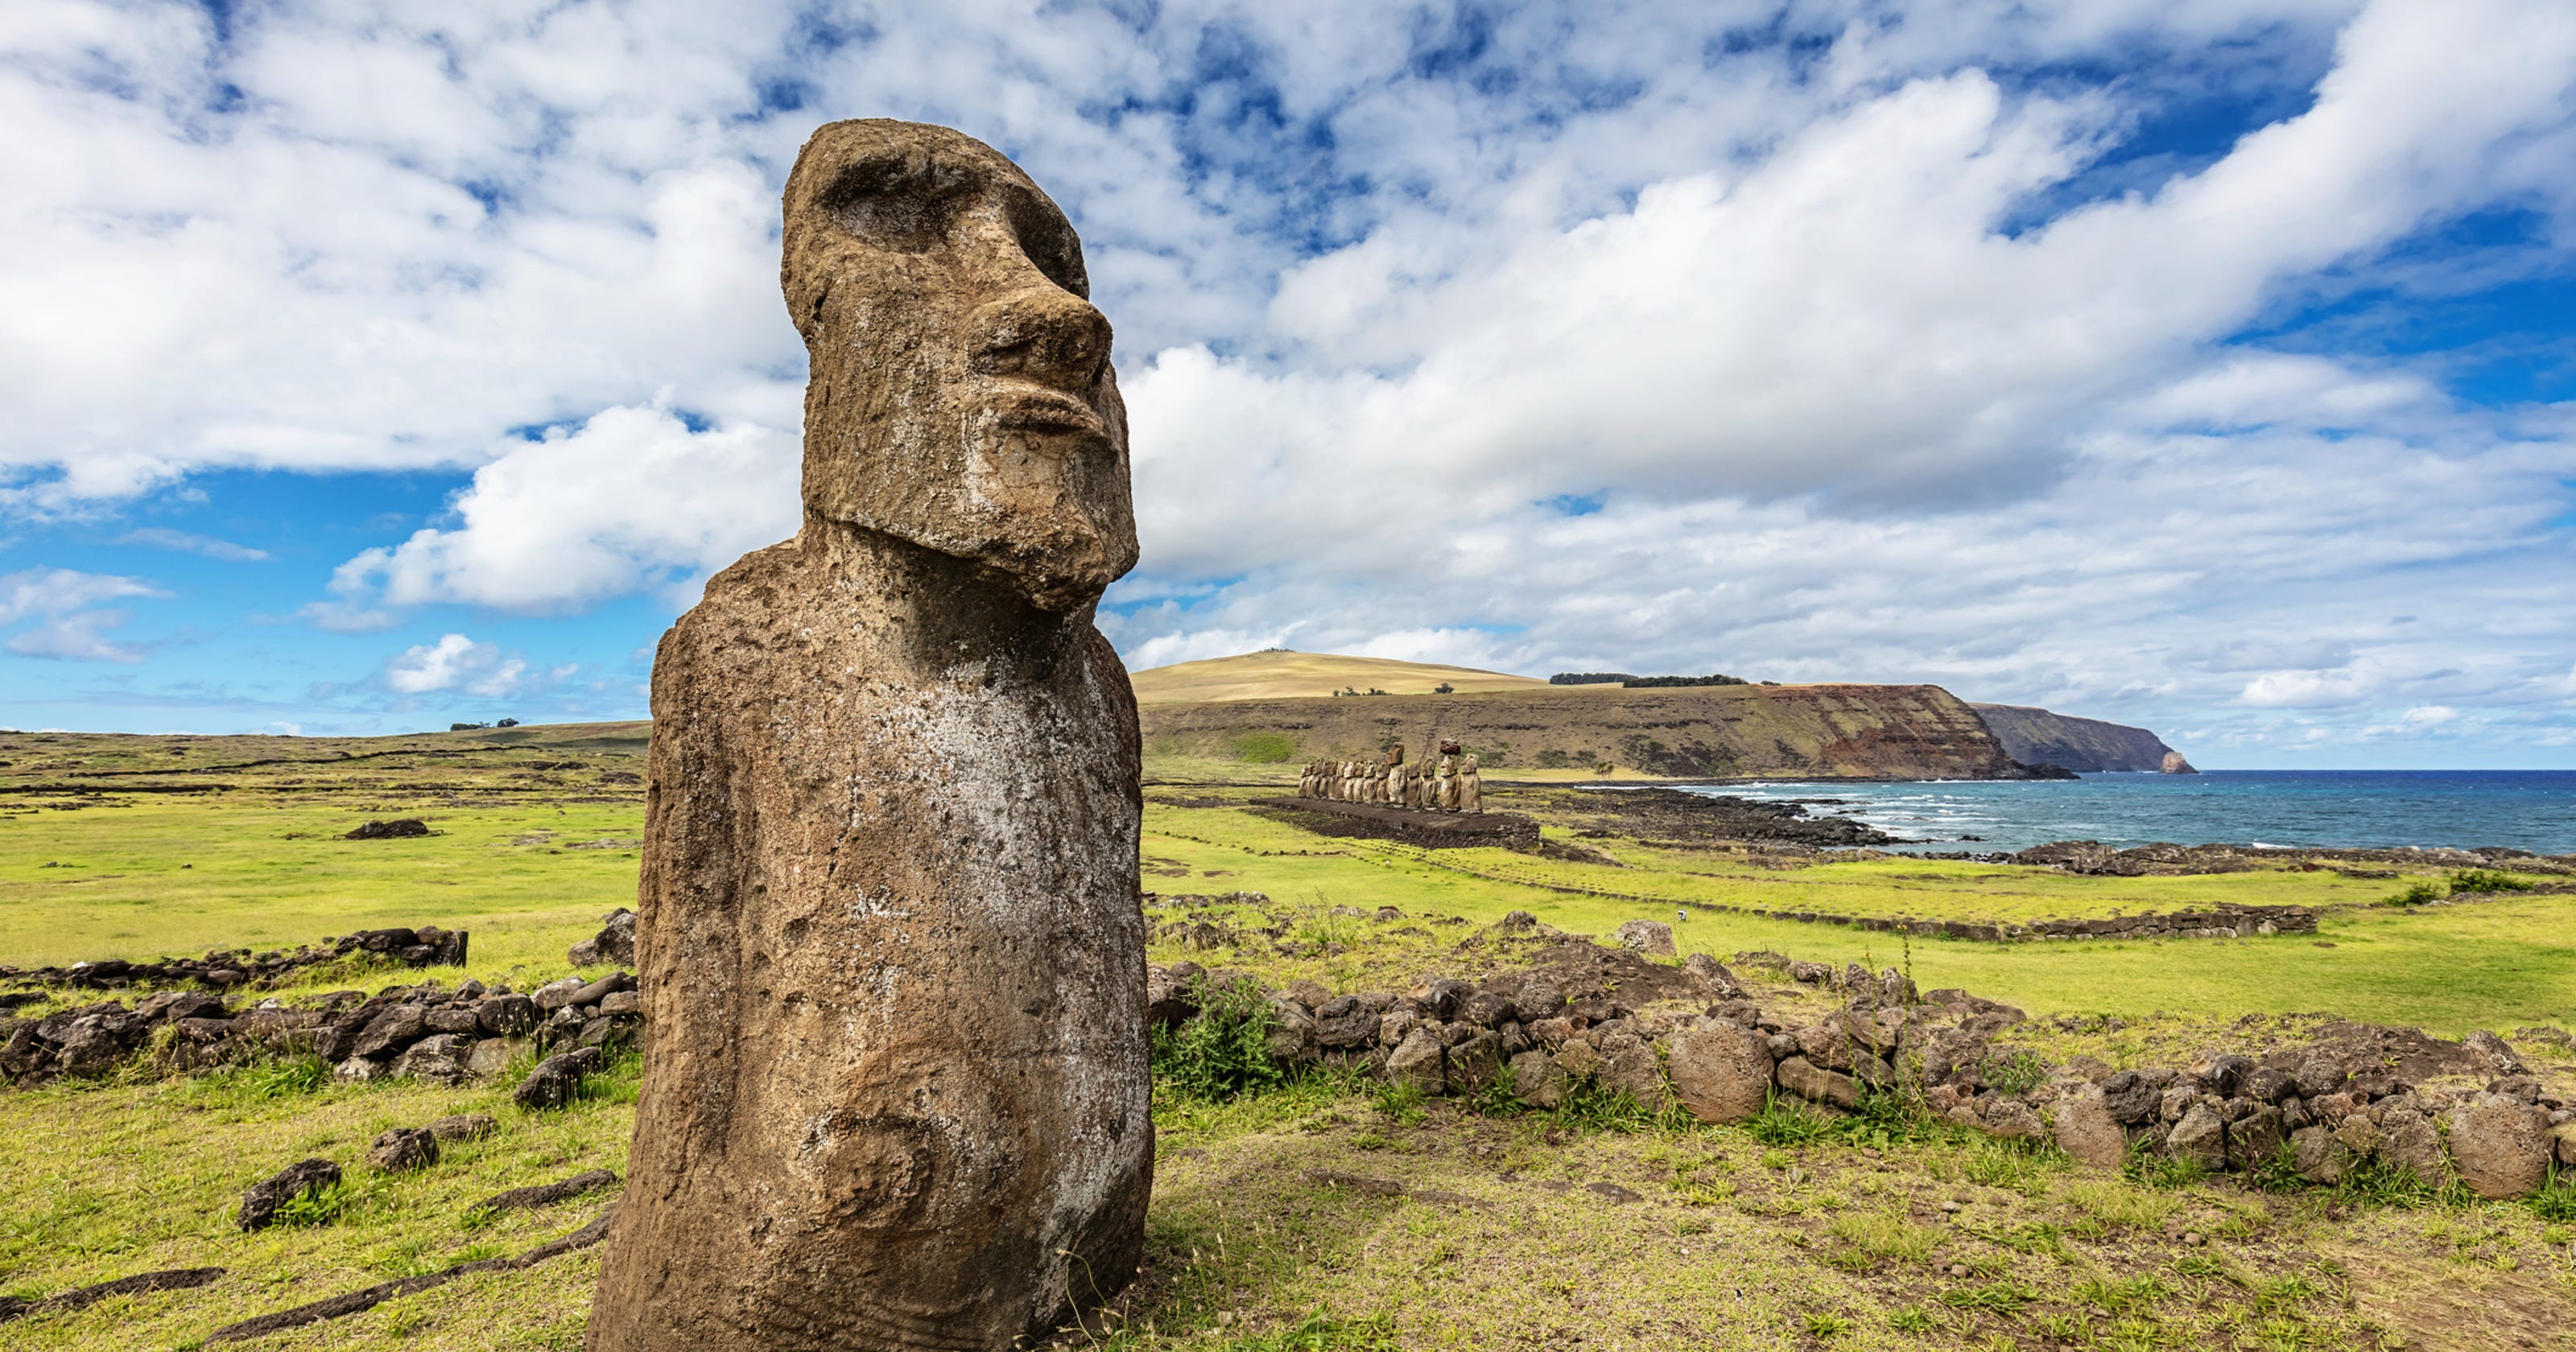 Moai and more: Beautiful images of Easter Island